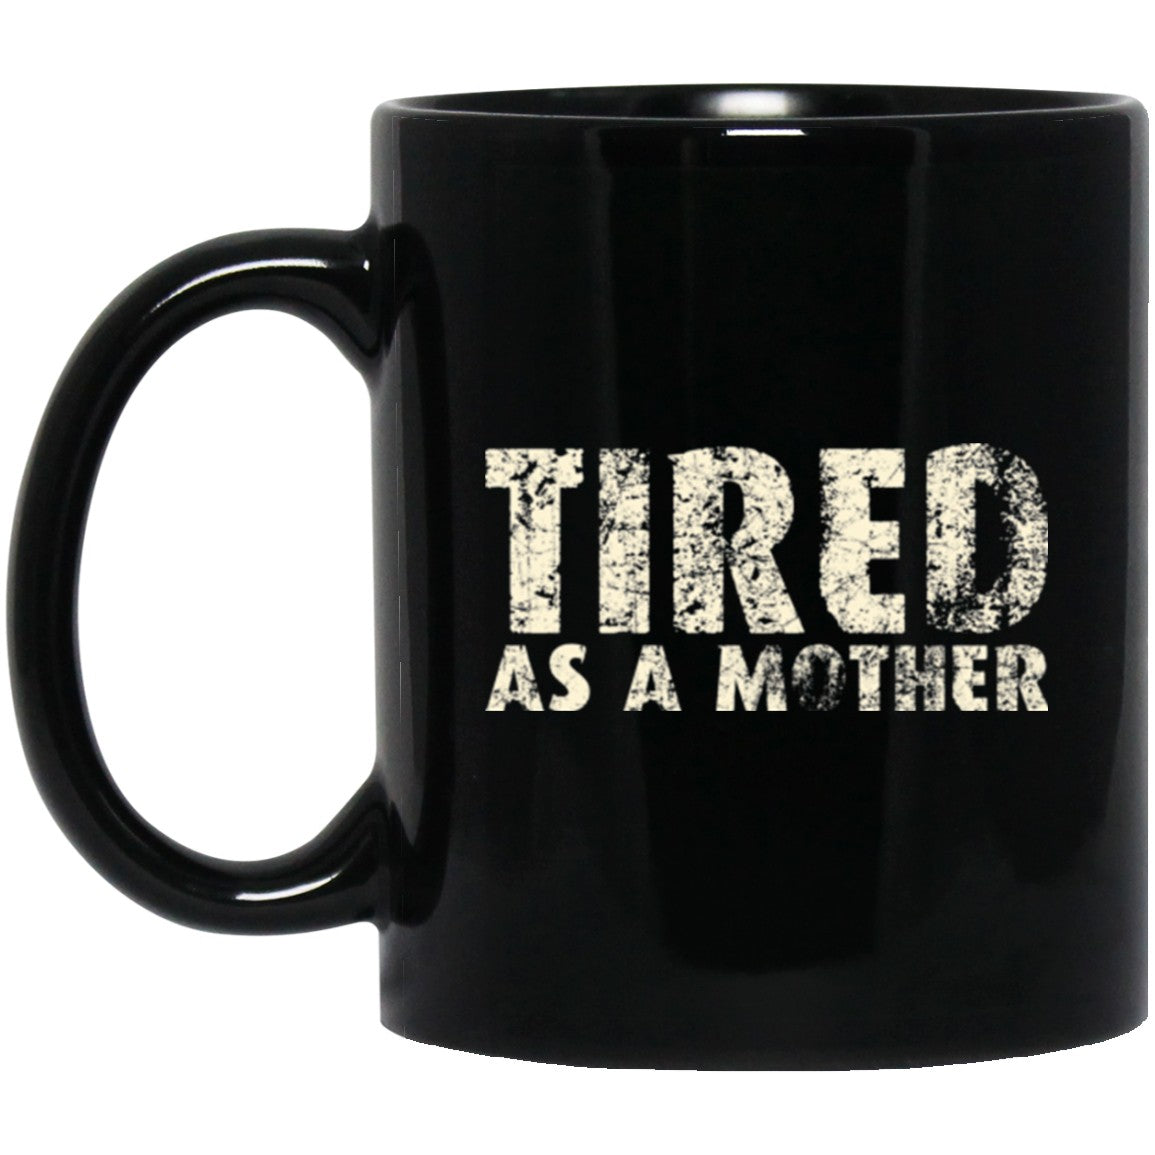 Mom Mug Tired As A Mother funny Black Coffee Mugs - GoneBold.gift